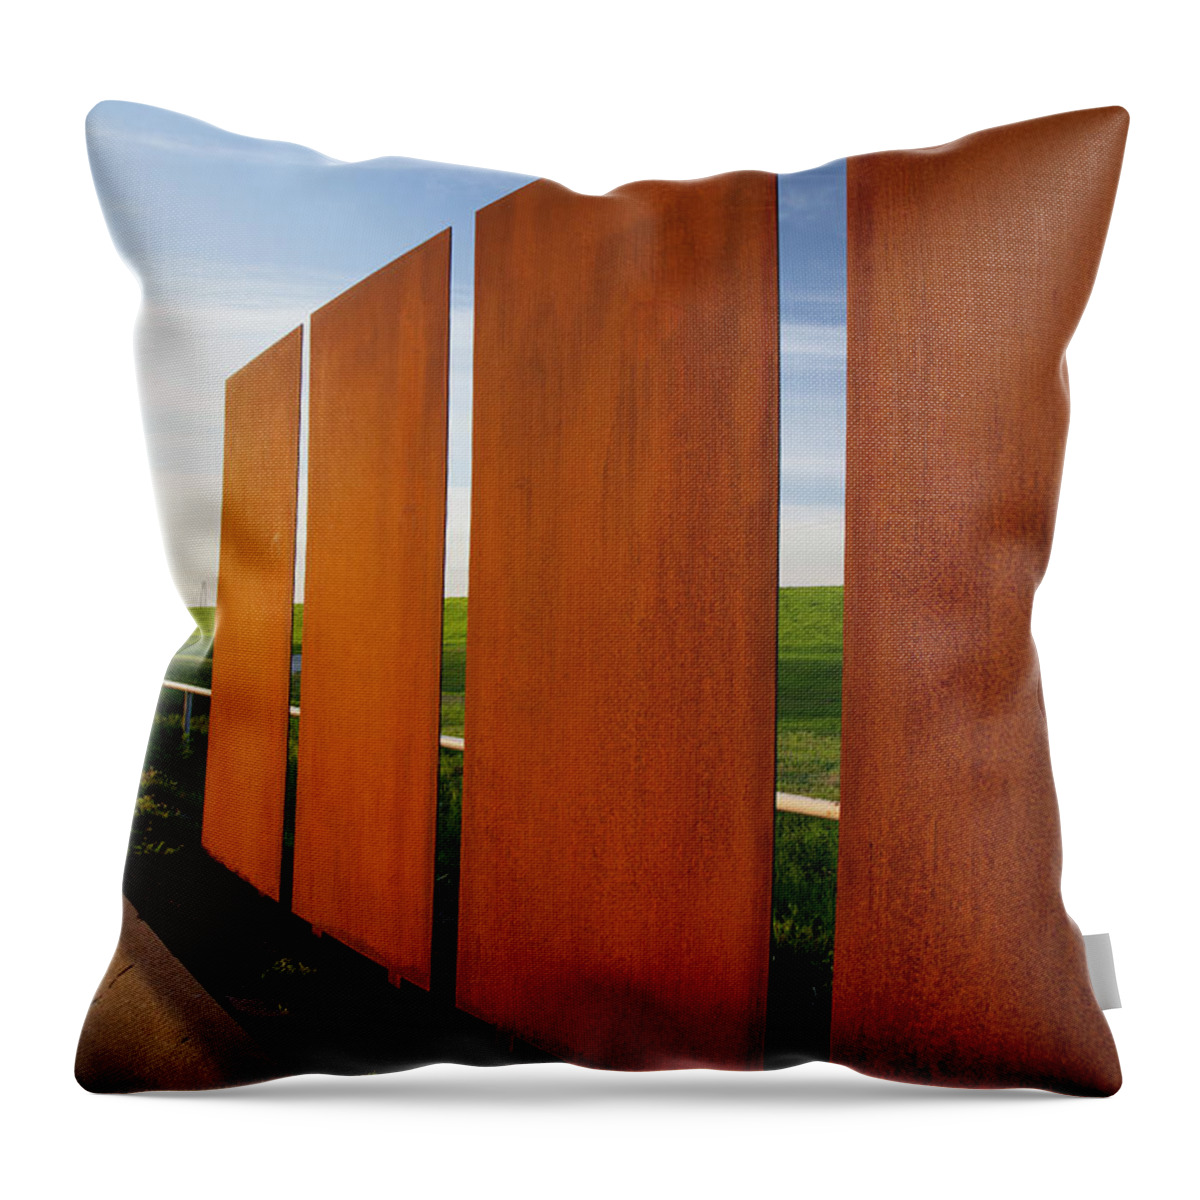 Art Installation Throw Pillow featuring the photograph Art and the Horizon, Dallas Texas by Greg Kopriva